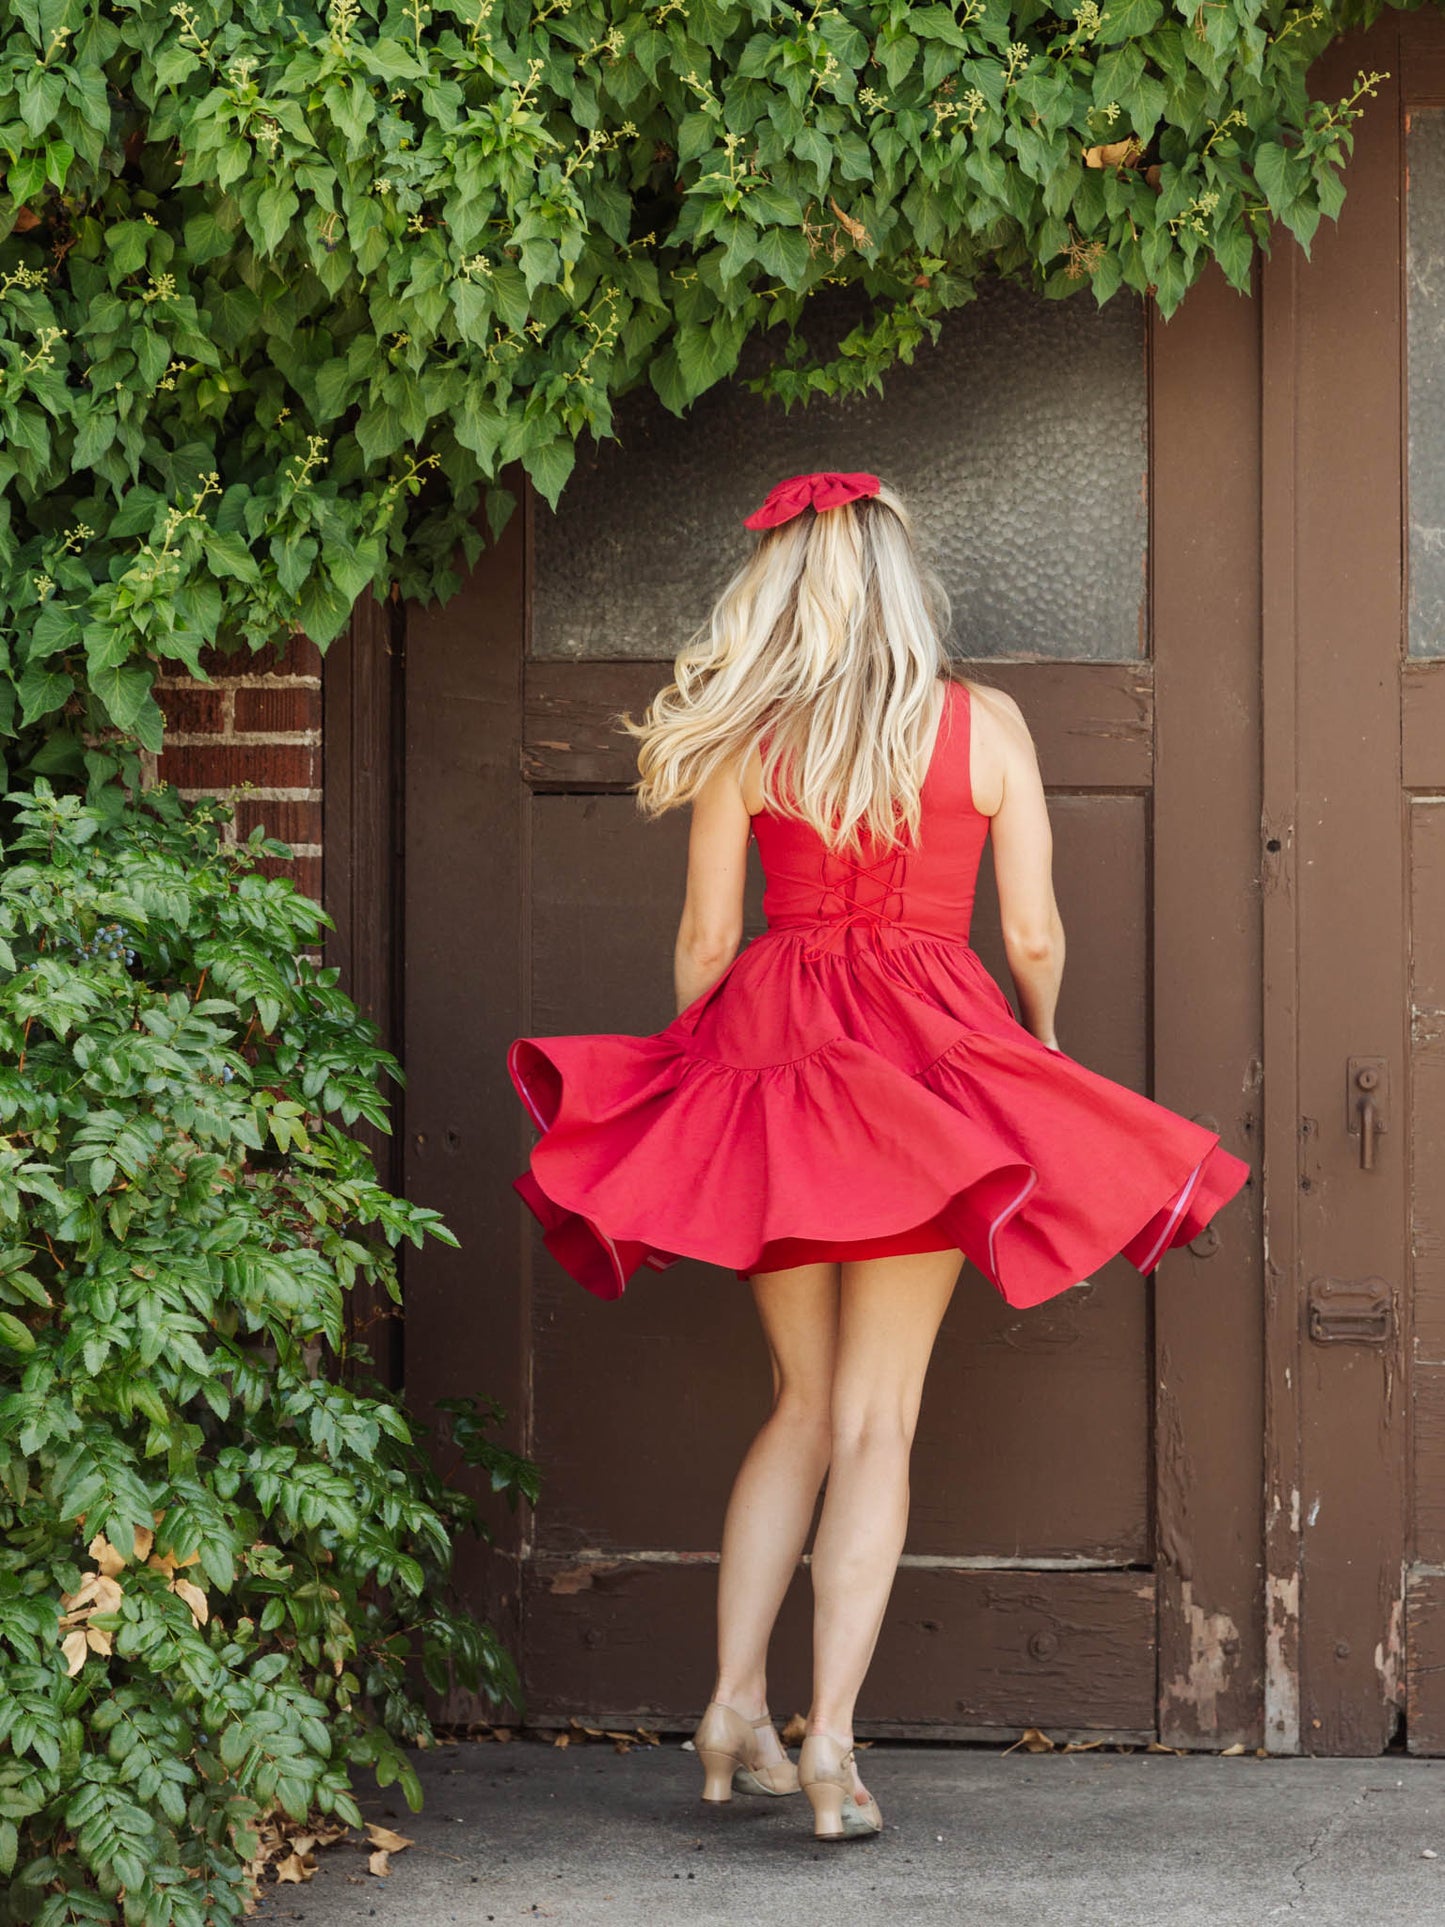 The Journey dress in Poppy Red - IN STOCK NOW!